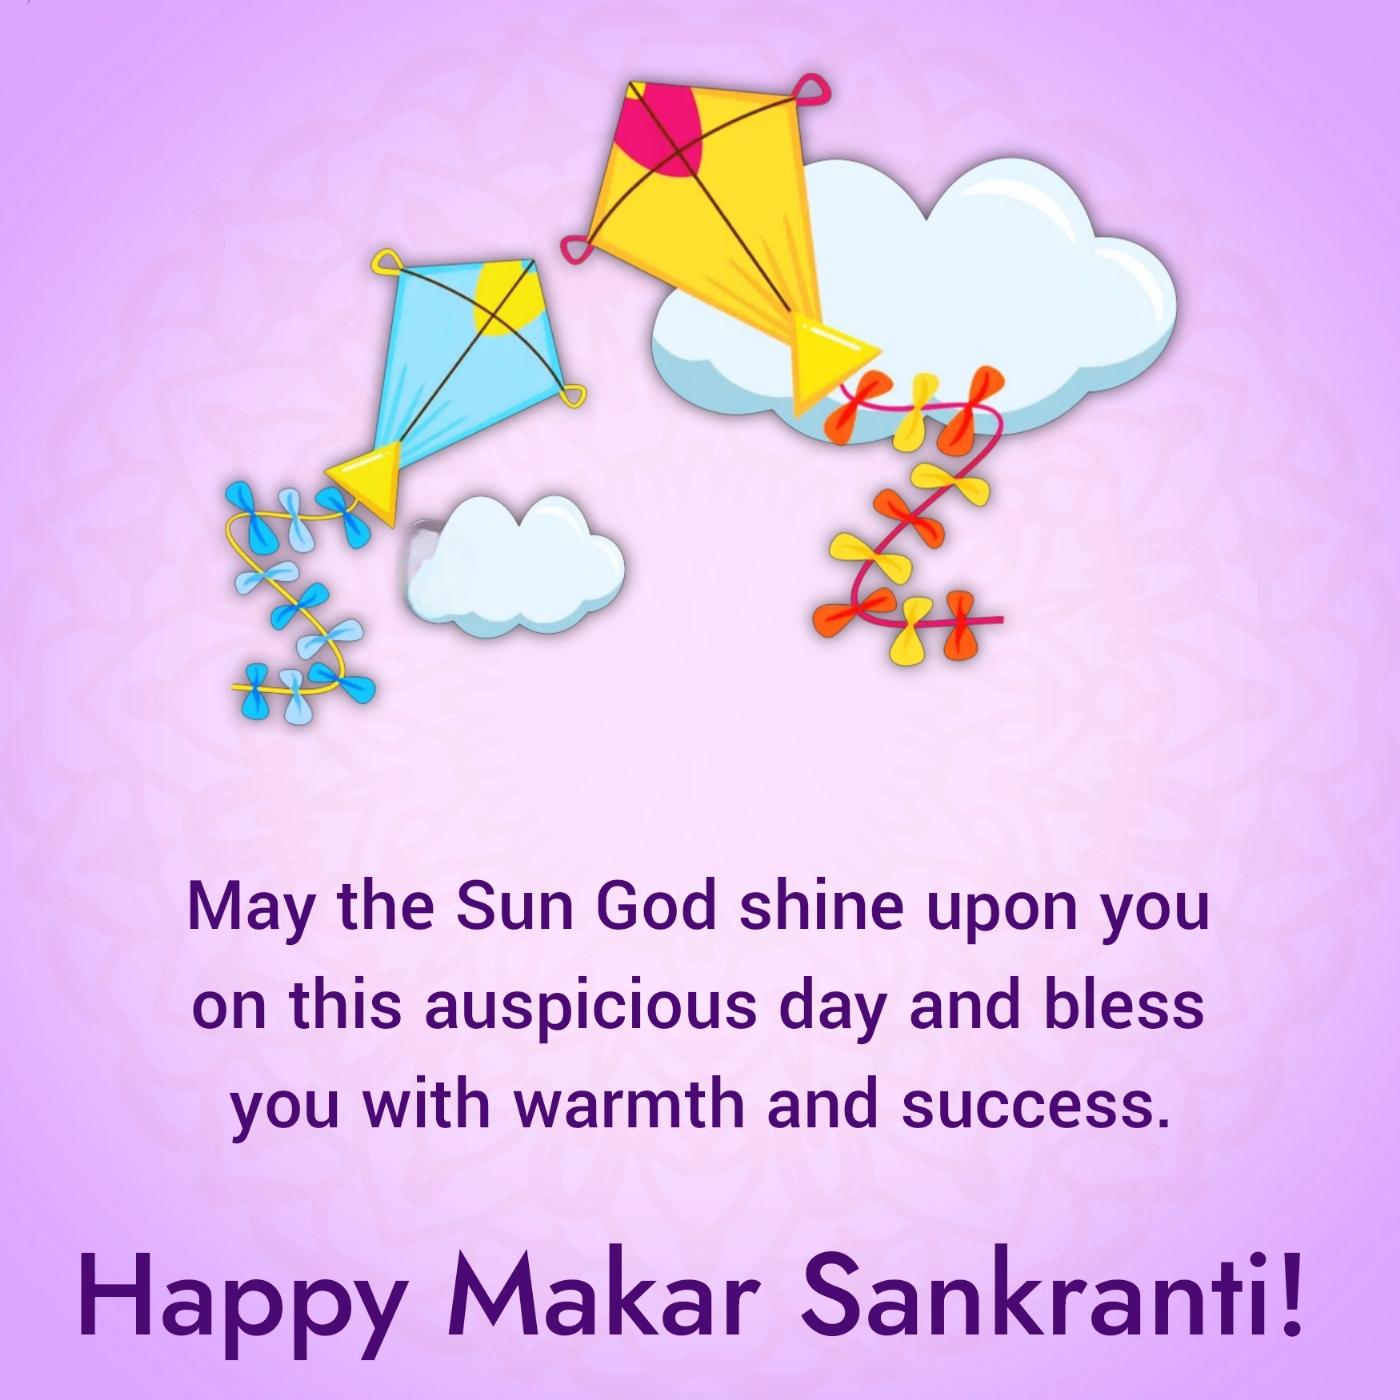 May the Sun God shine upon you on this auspicious day